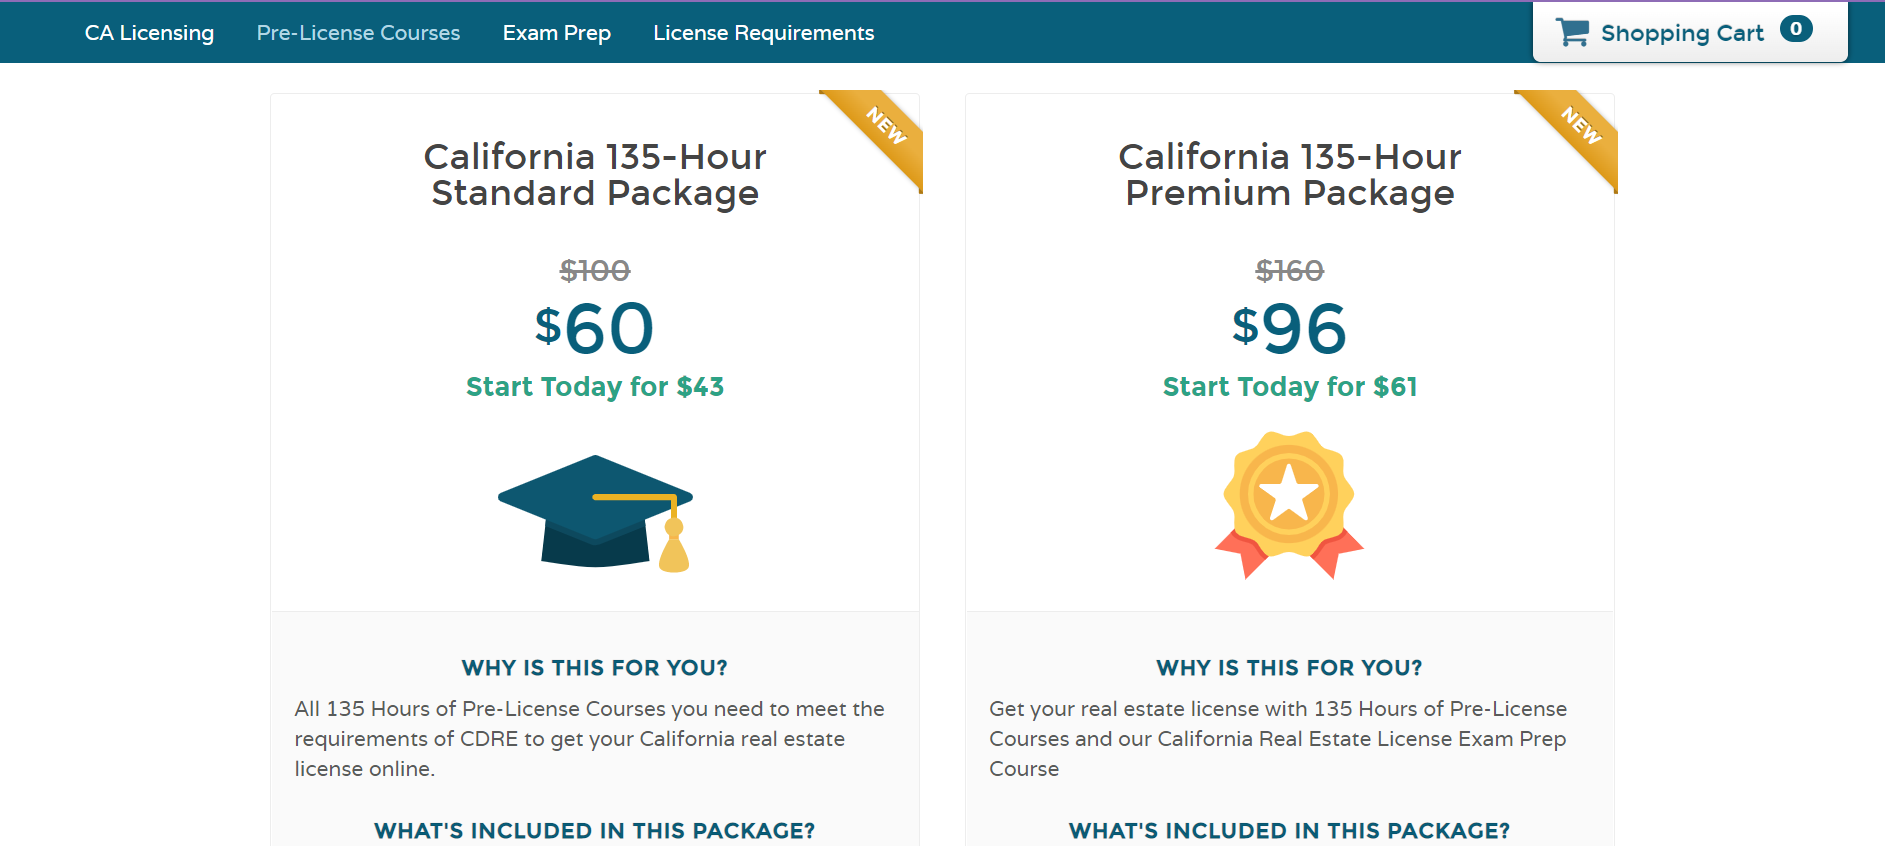 Advertisement for the California Real Estate License online course from Vaned.